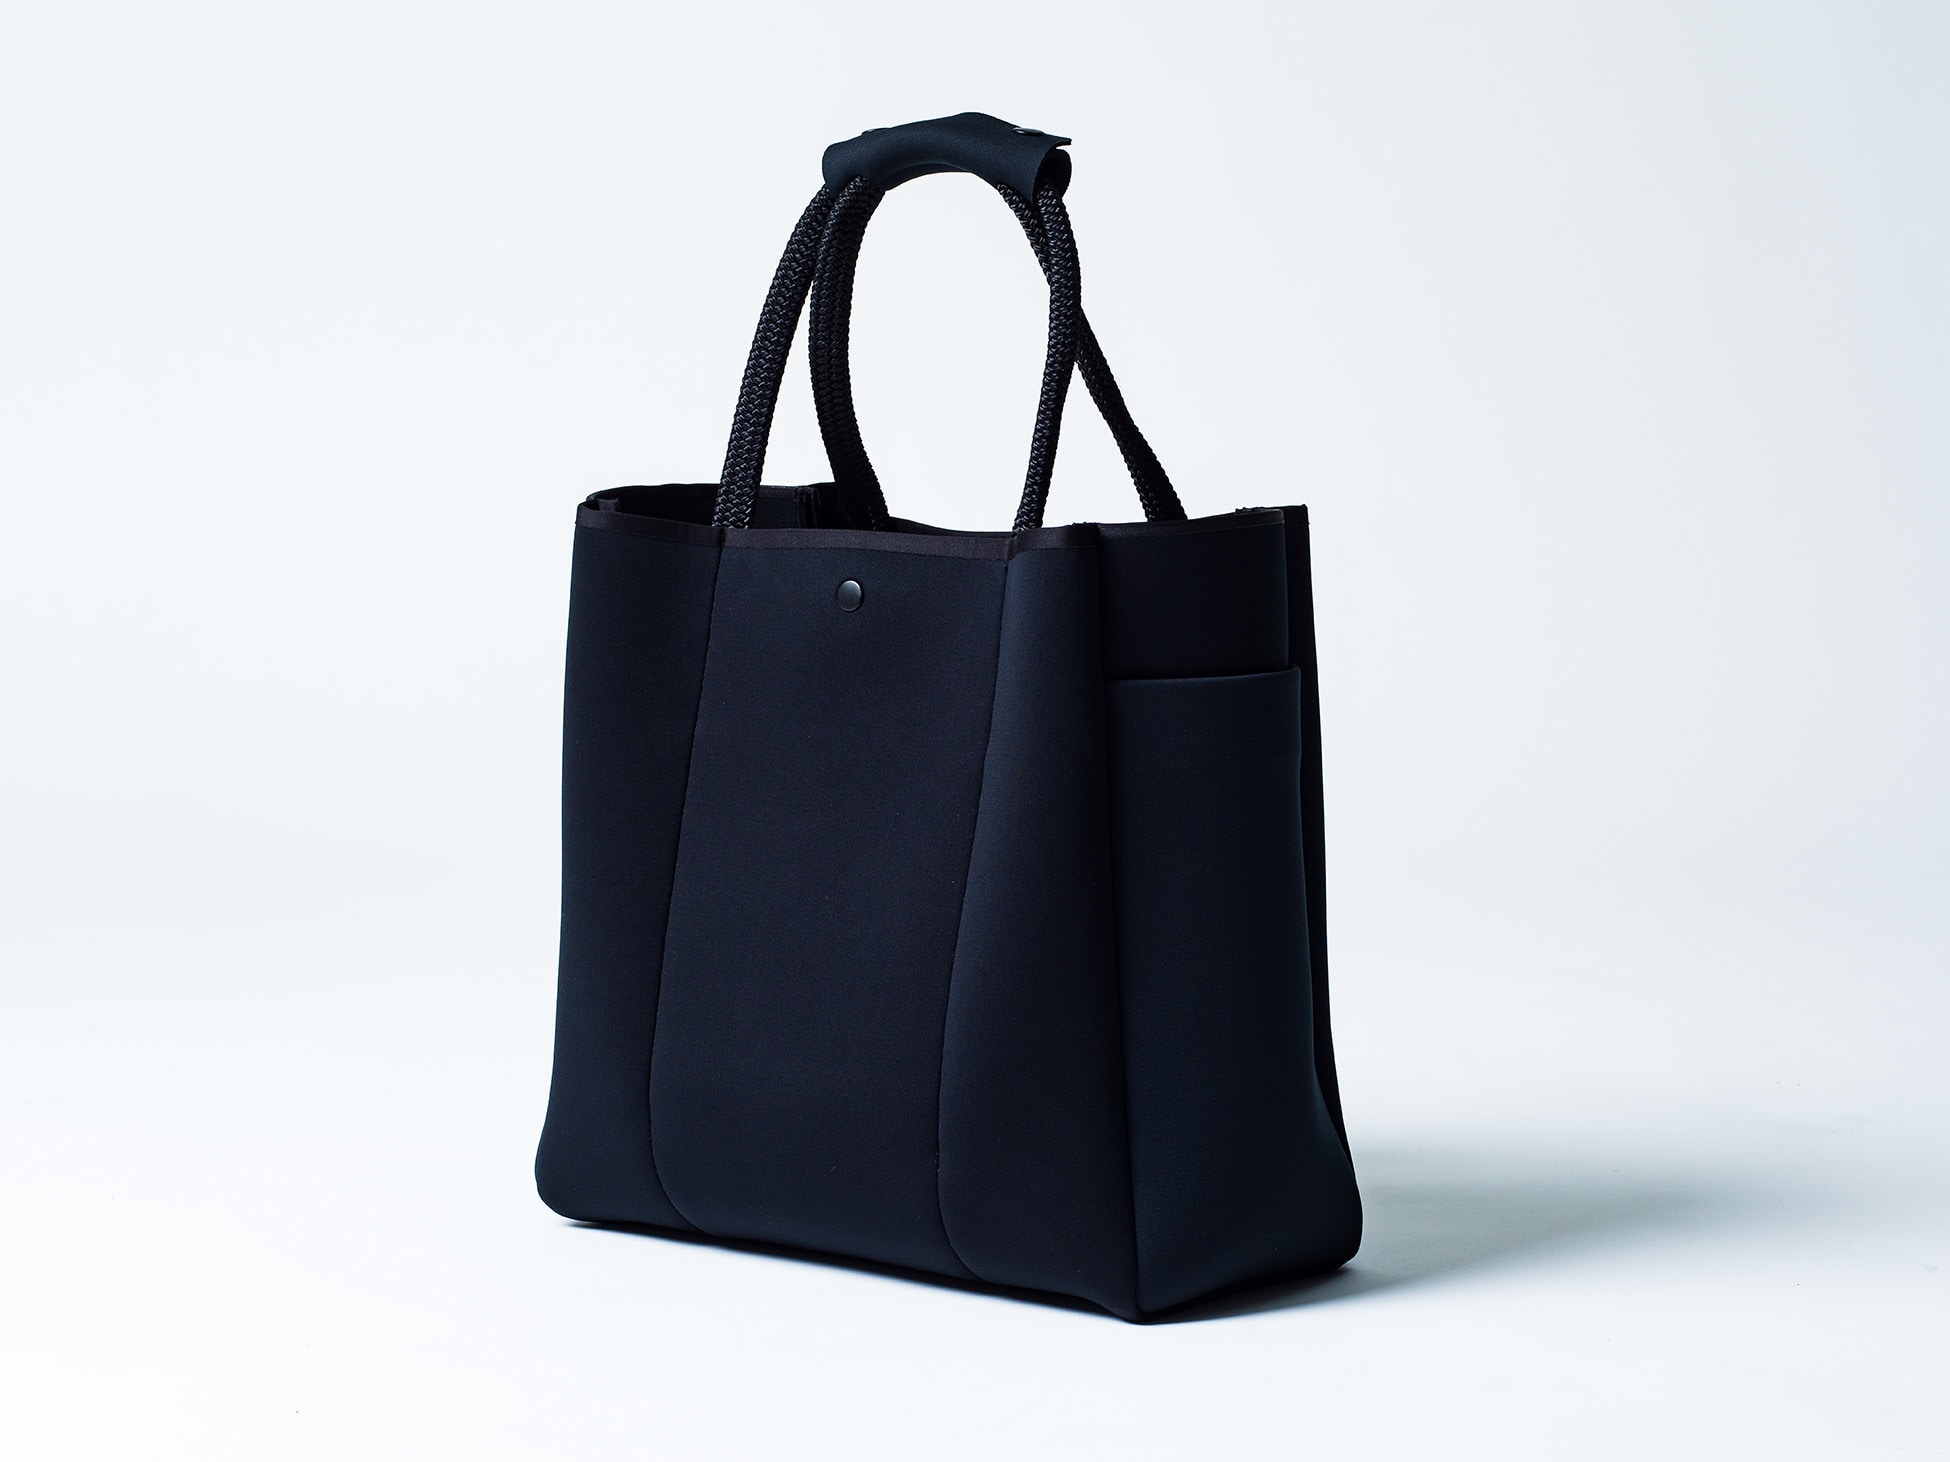 STATE OF ESCAPE for Ron Herman Tote Bag 5.28(Sat) New Arrival